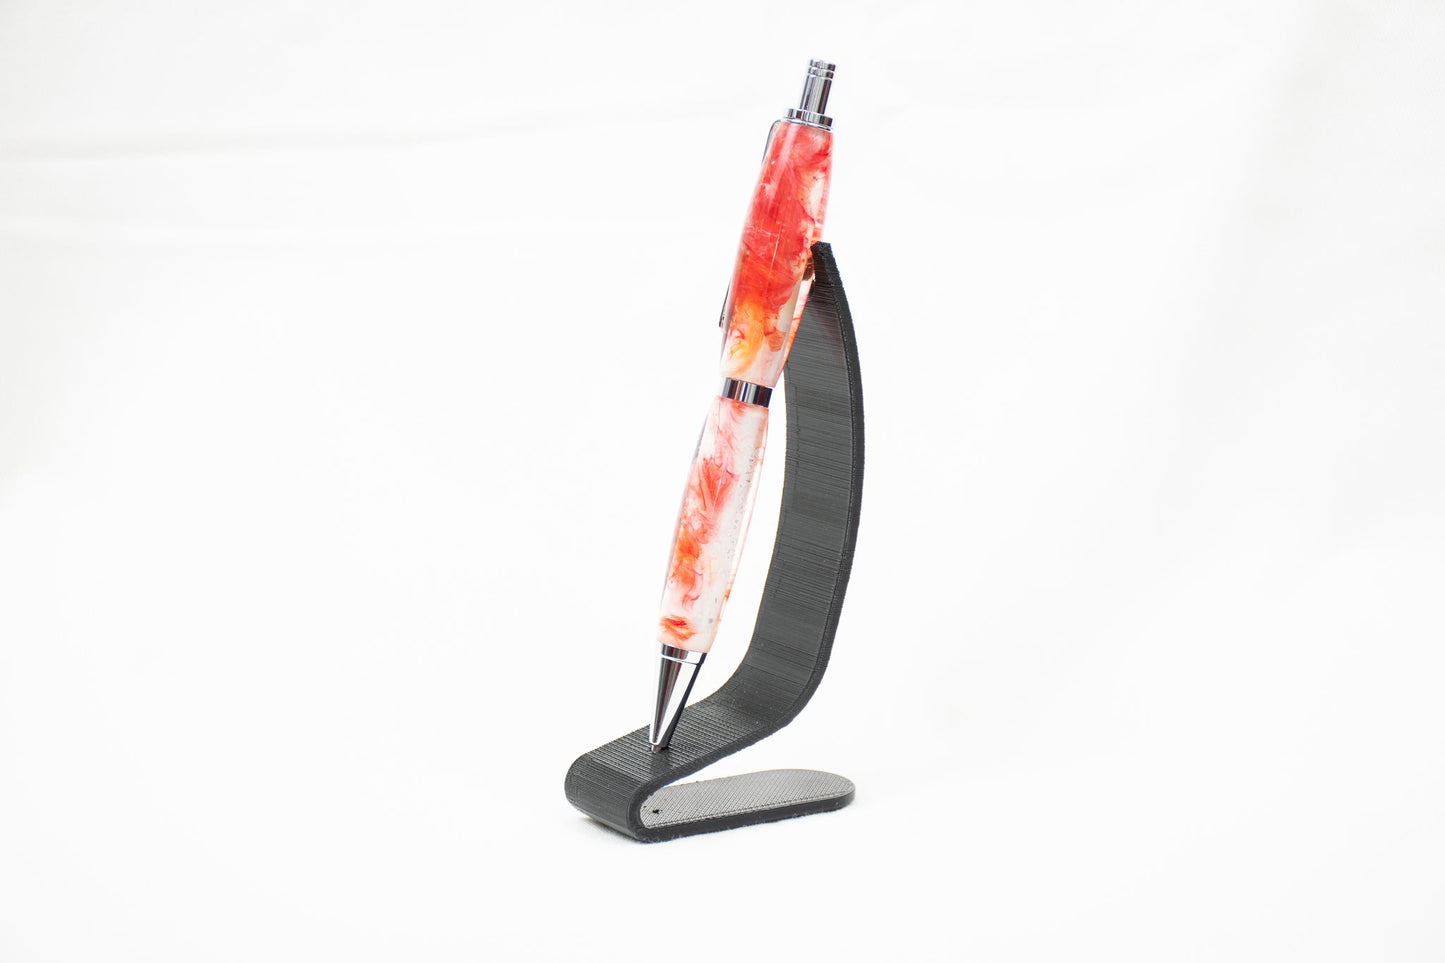 Handmade resin click pen with red translucent swirl dye on white background finished in chrome plating